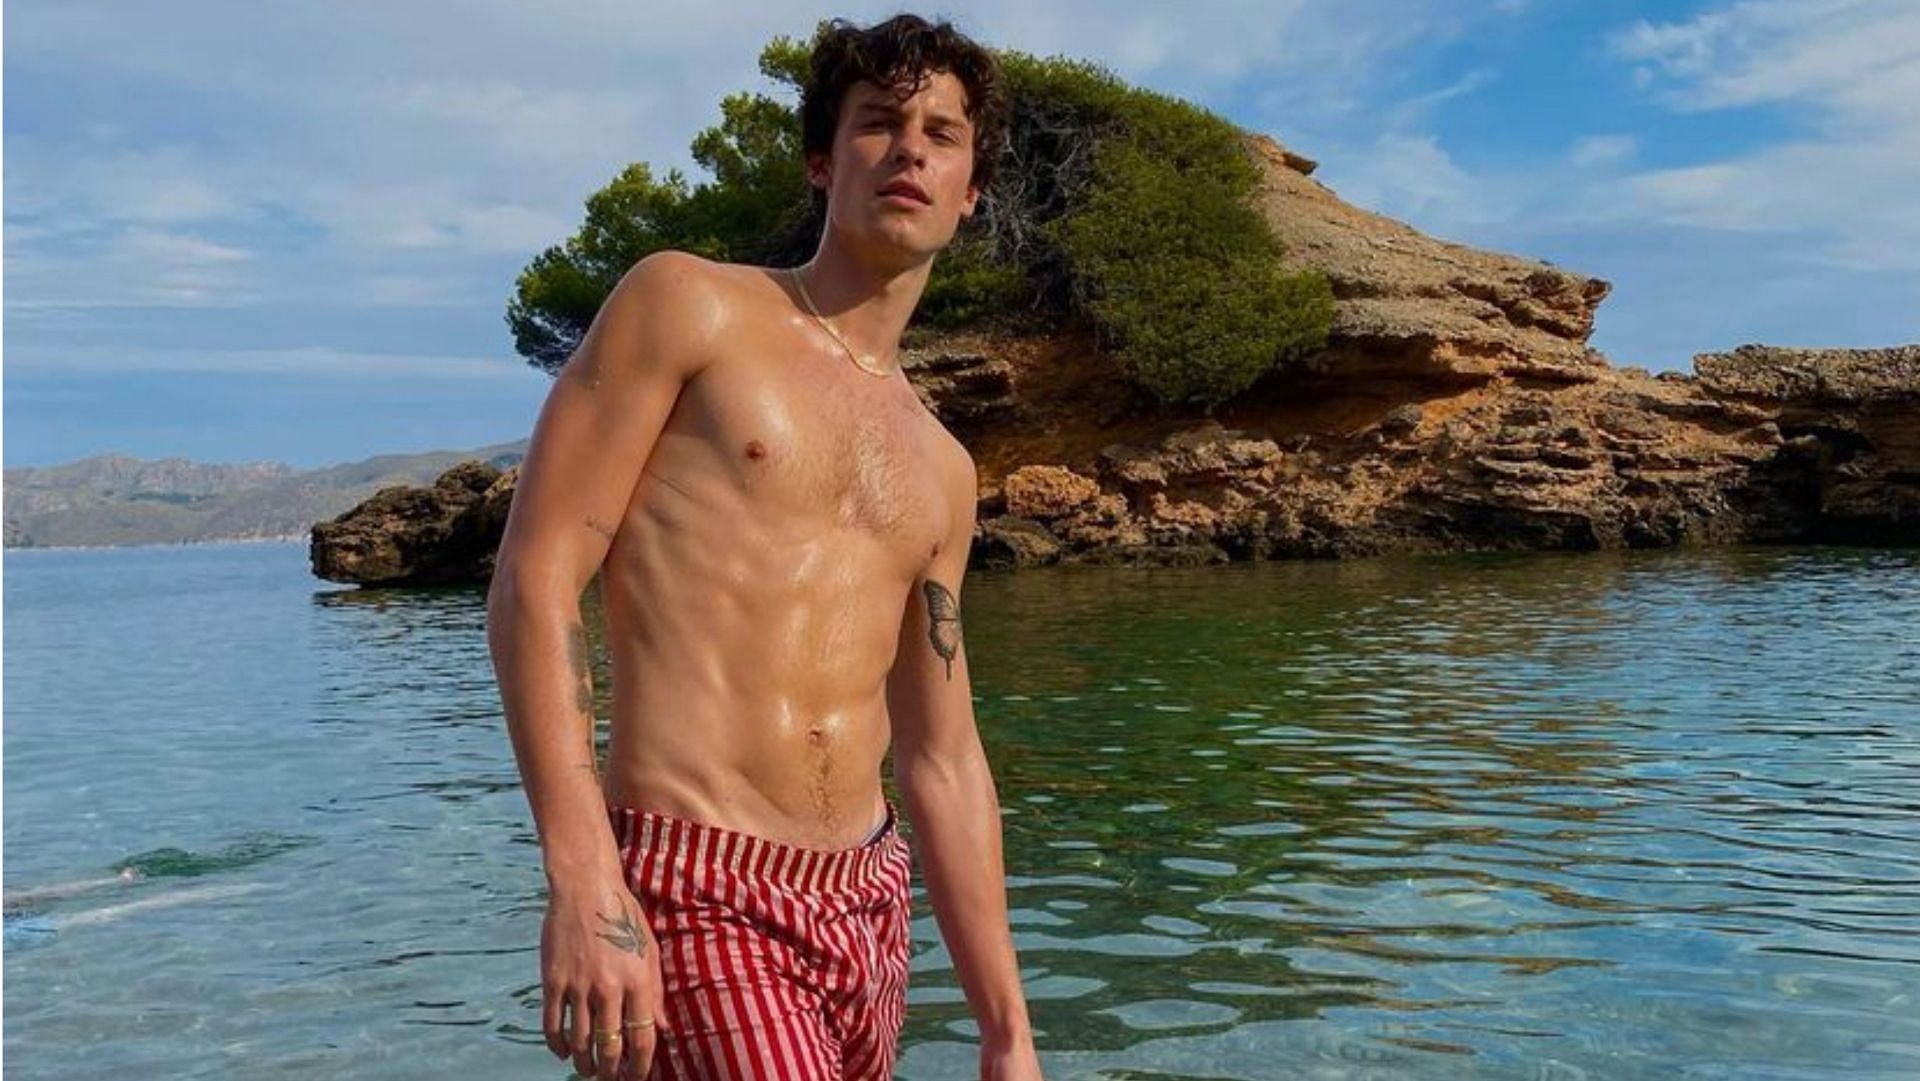 Get sculpted abs like Shawn Mendes. (Image by @shawnmendes via Instagram)